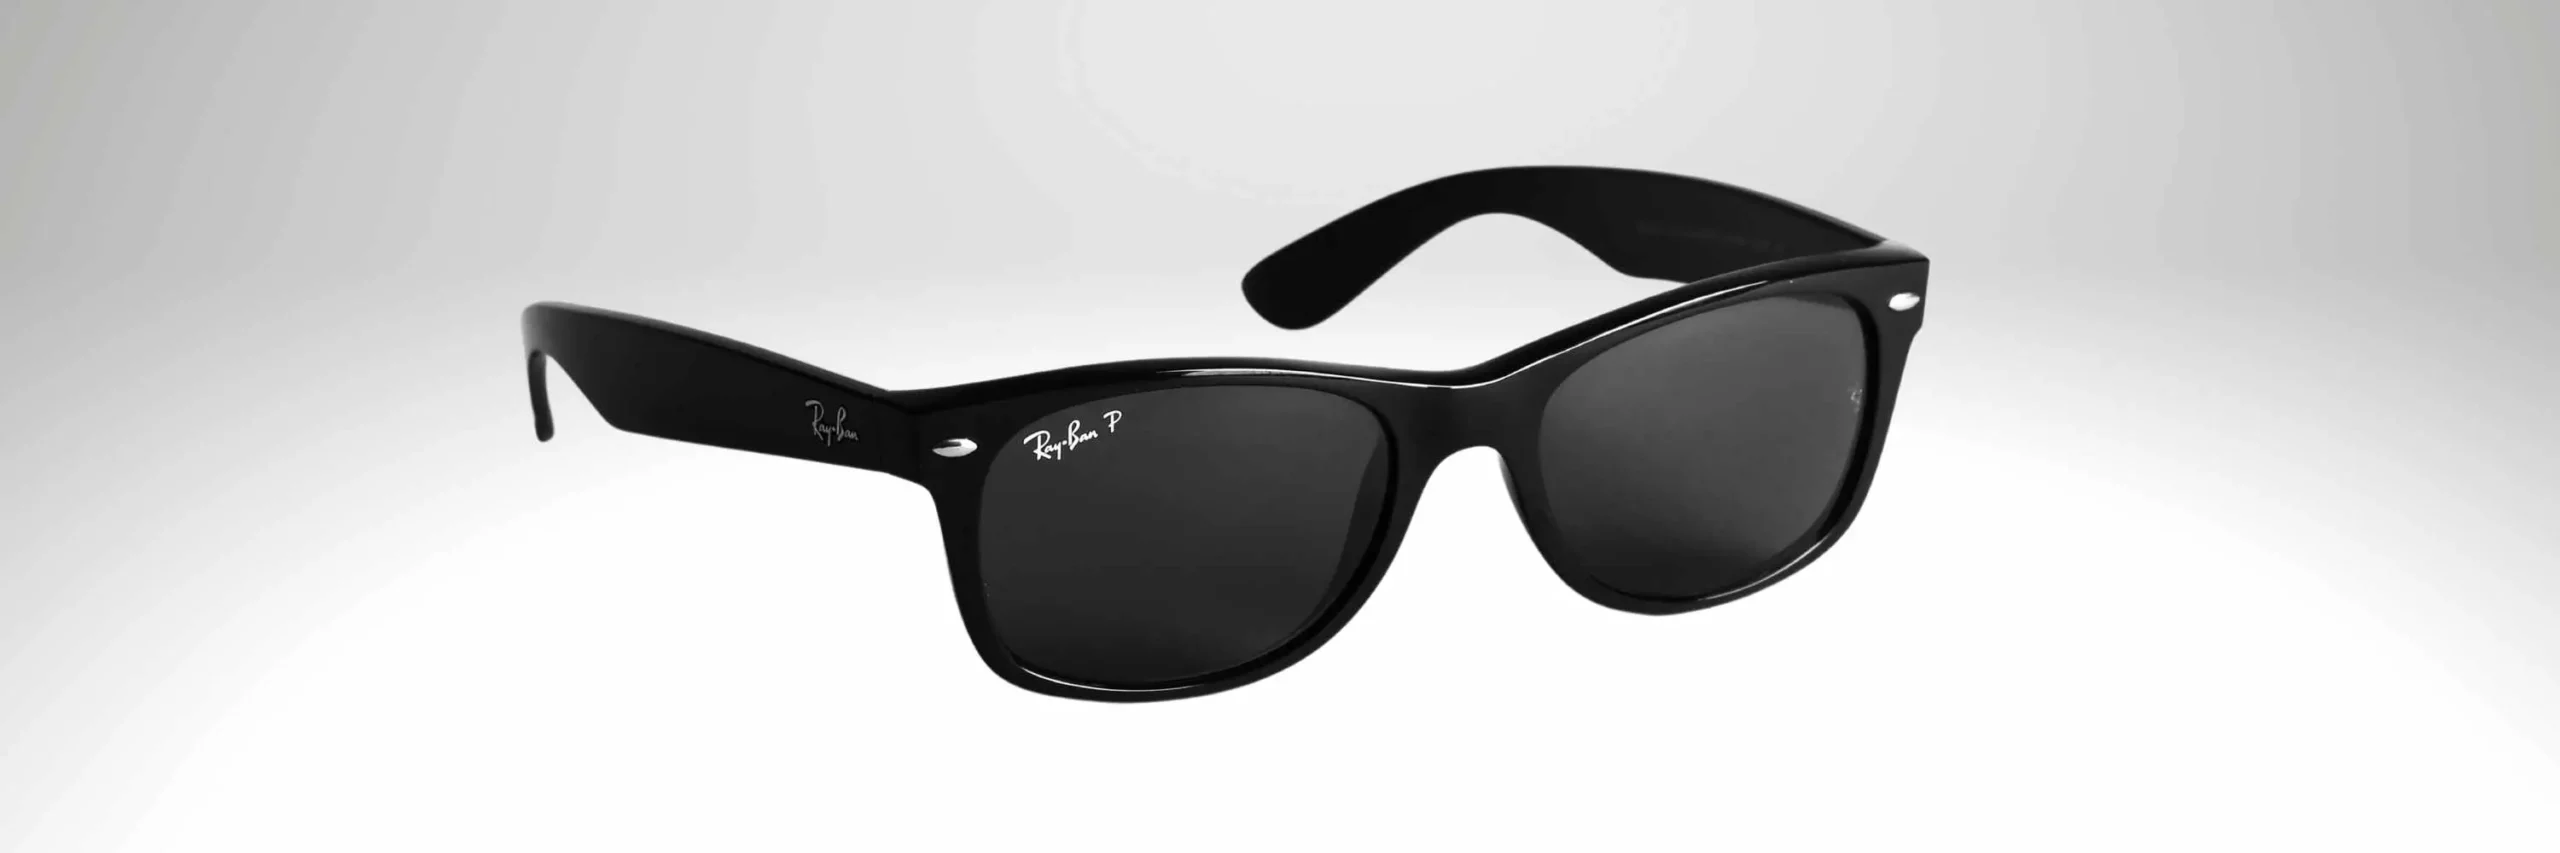 15 Best Sunglasses Brands For Men From Classic to Modern